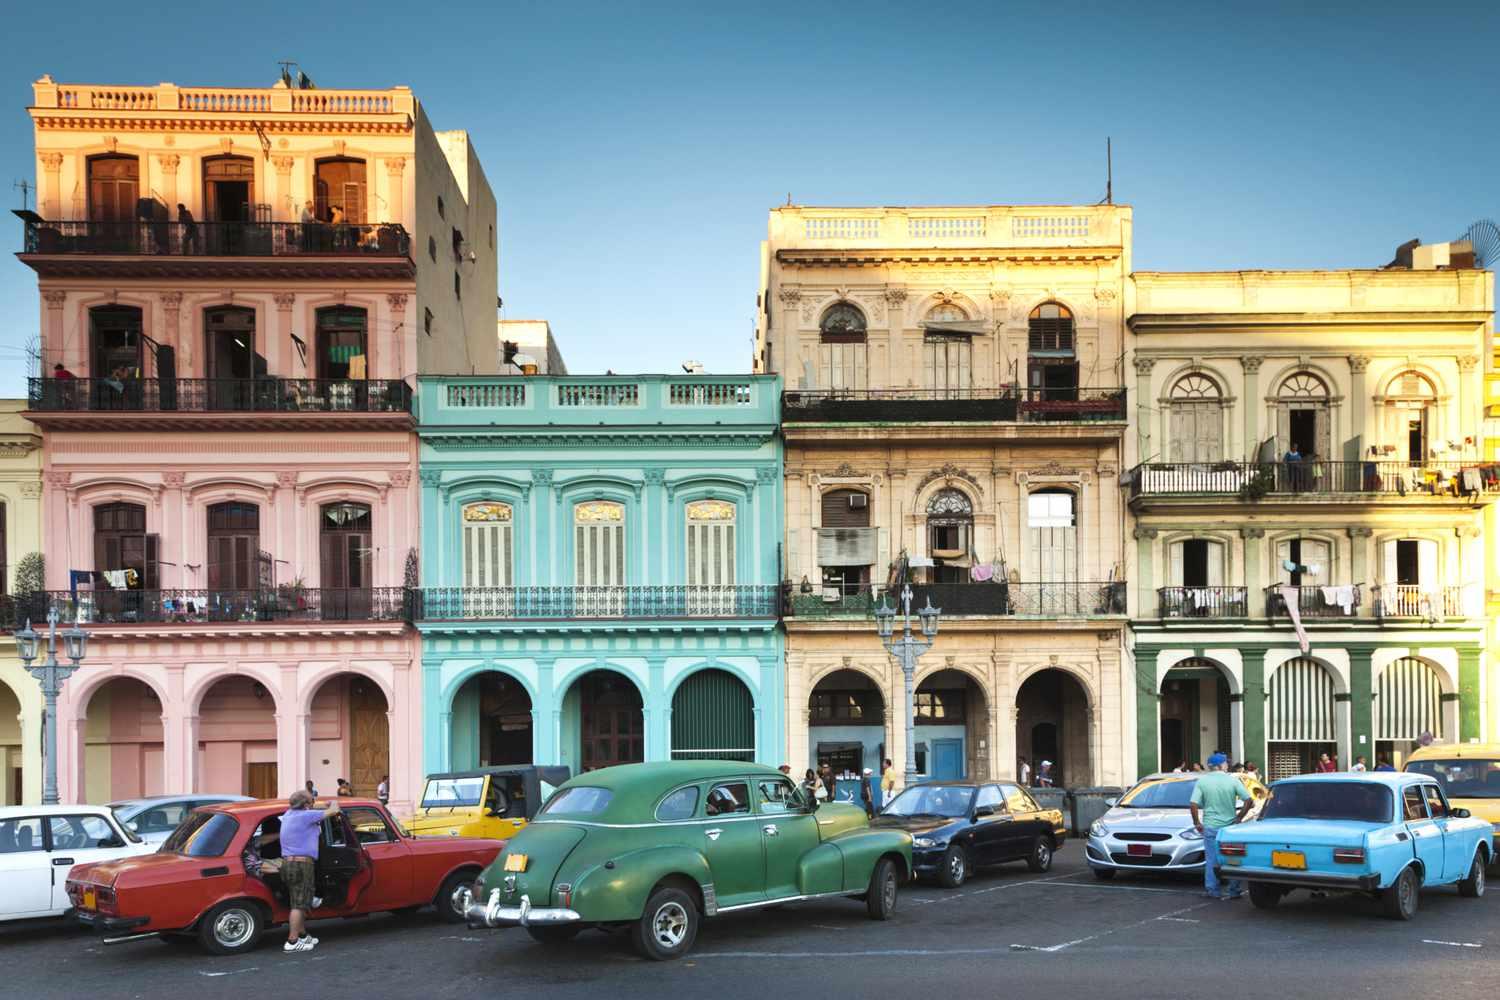 Top 10 Travel Destinations and Attractions in Cuba